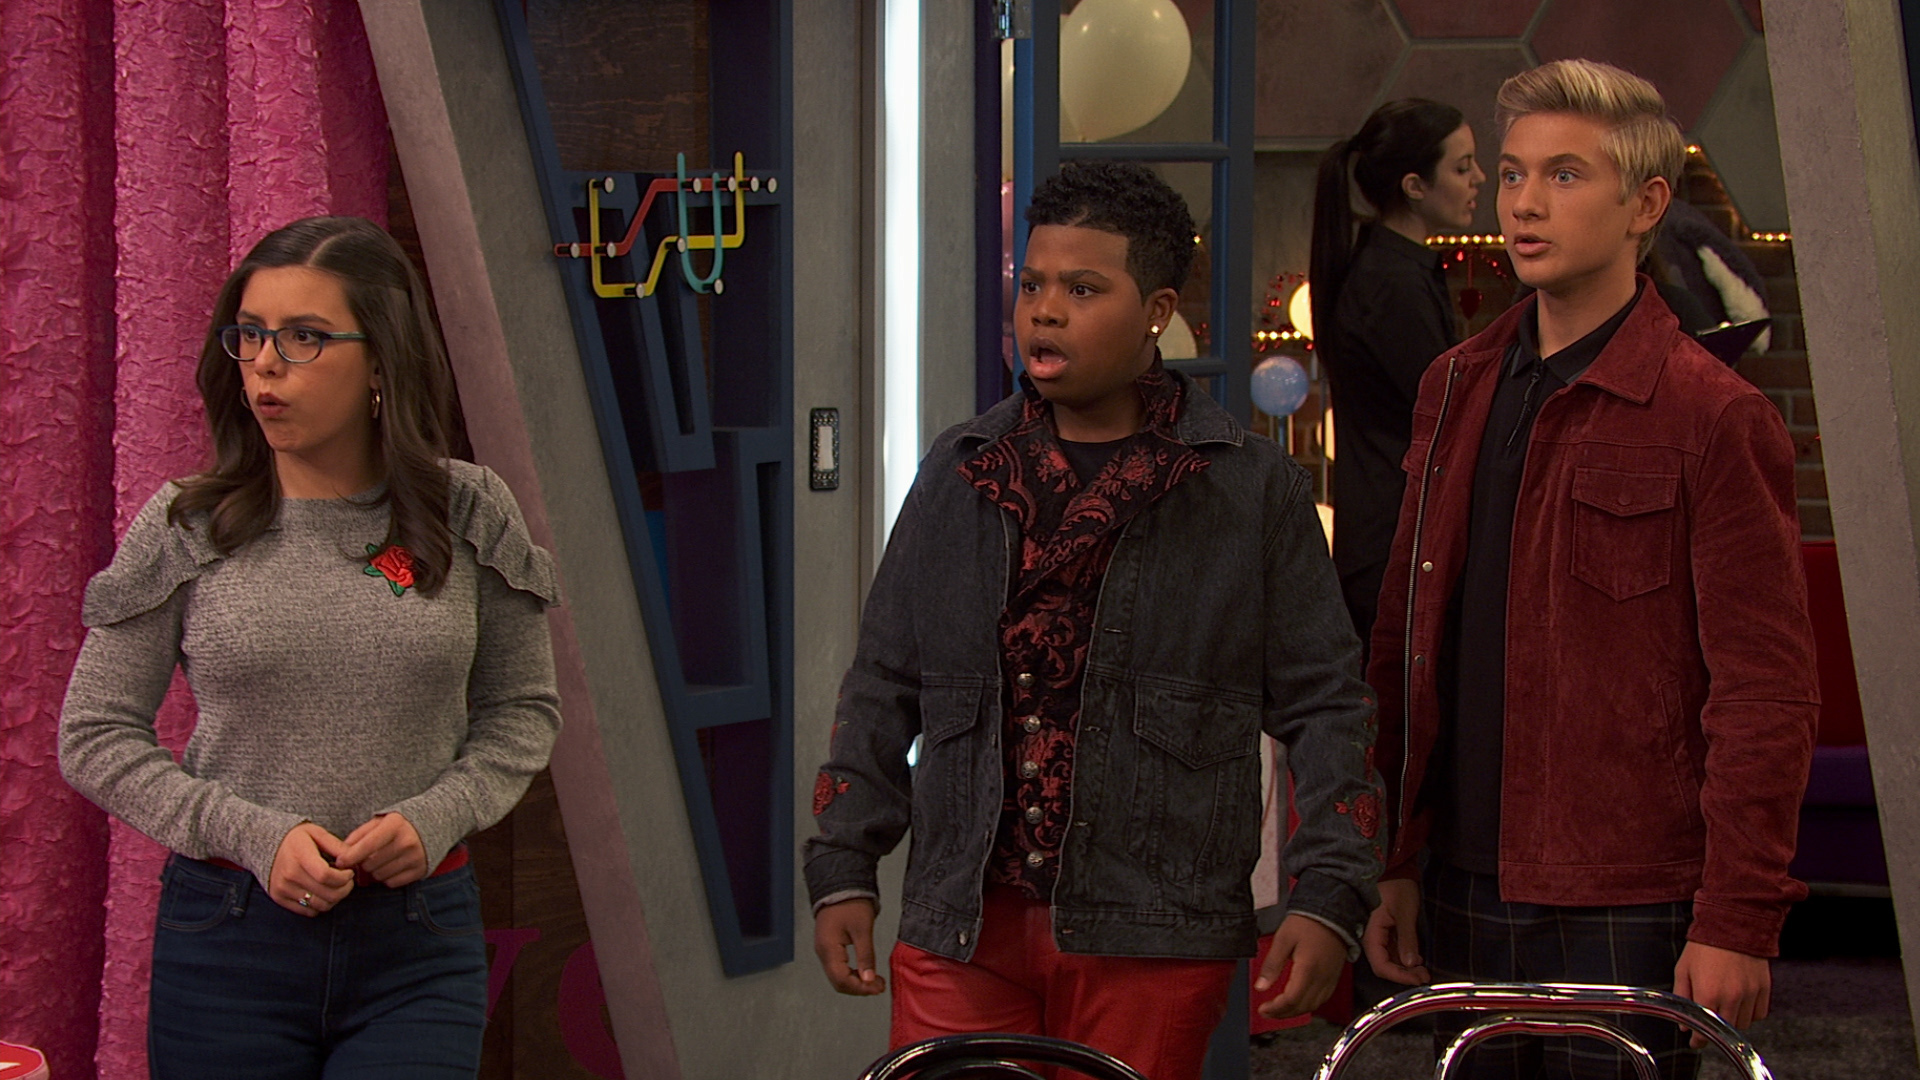 GameShakers on X: Babe! Special Power: Always gets her way. Known